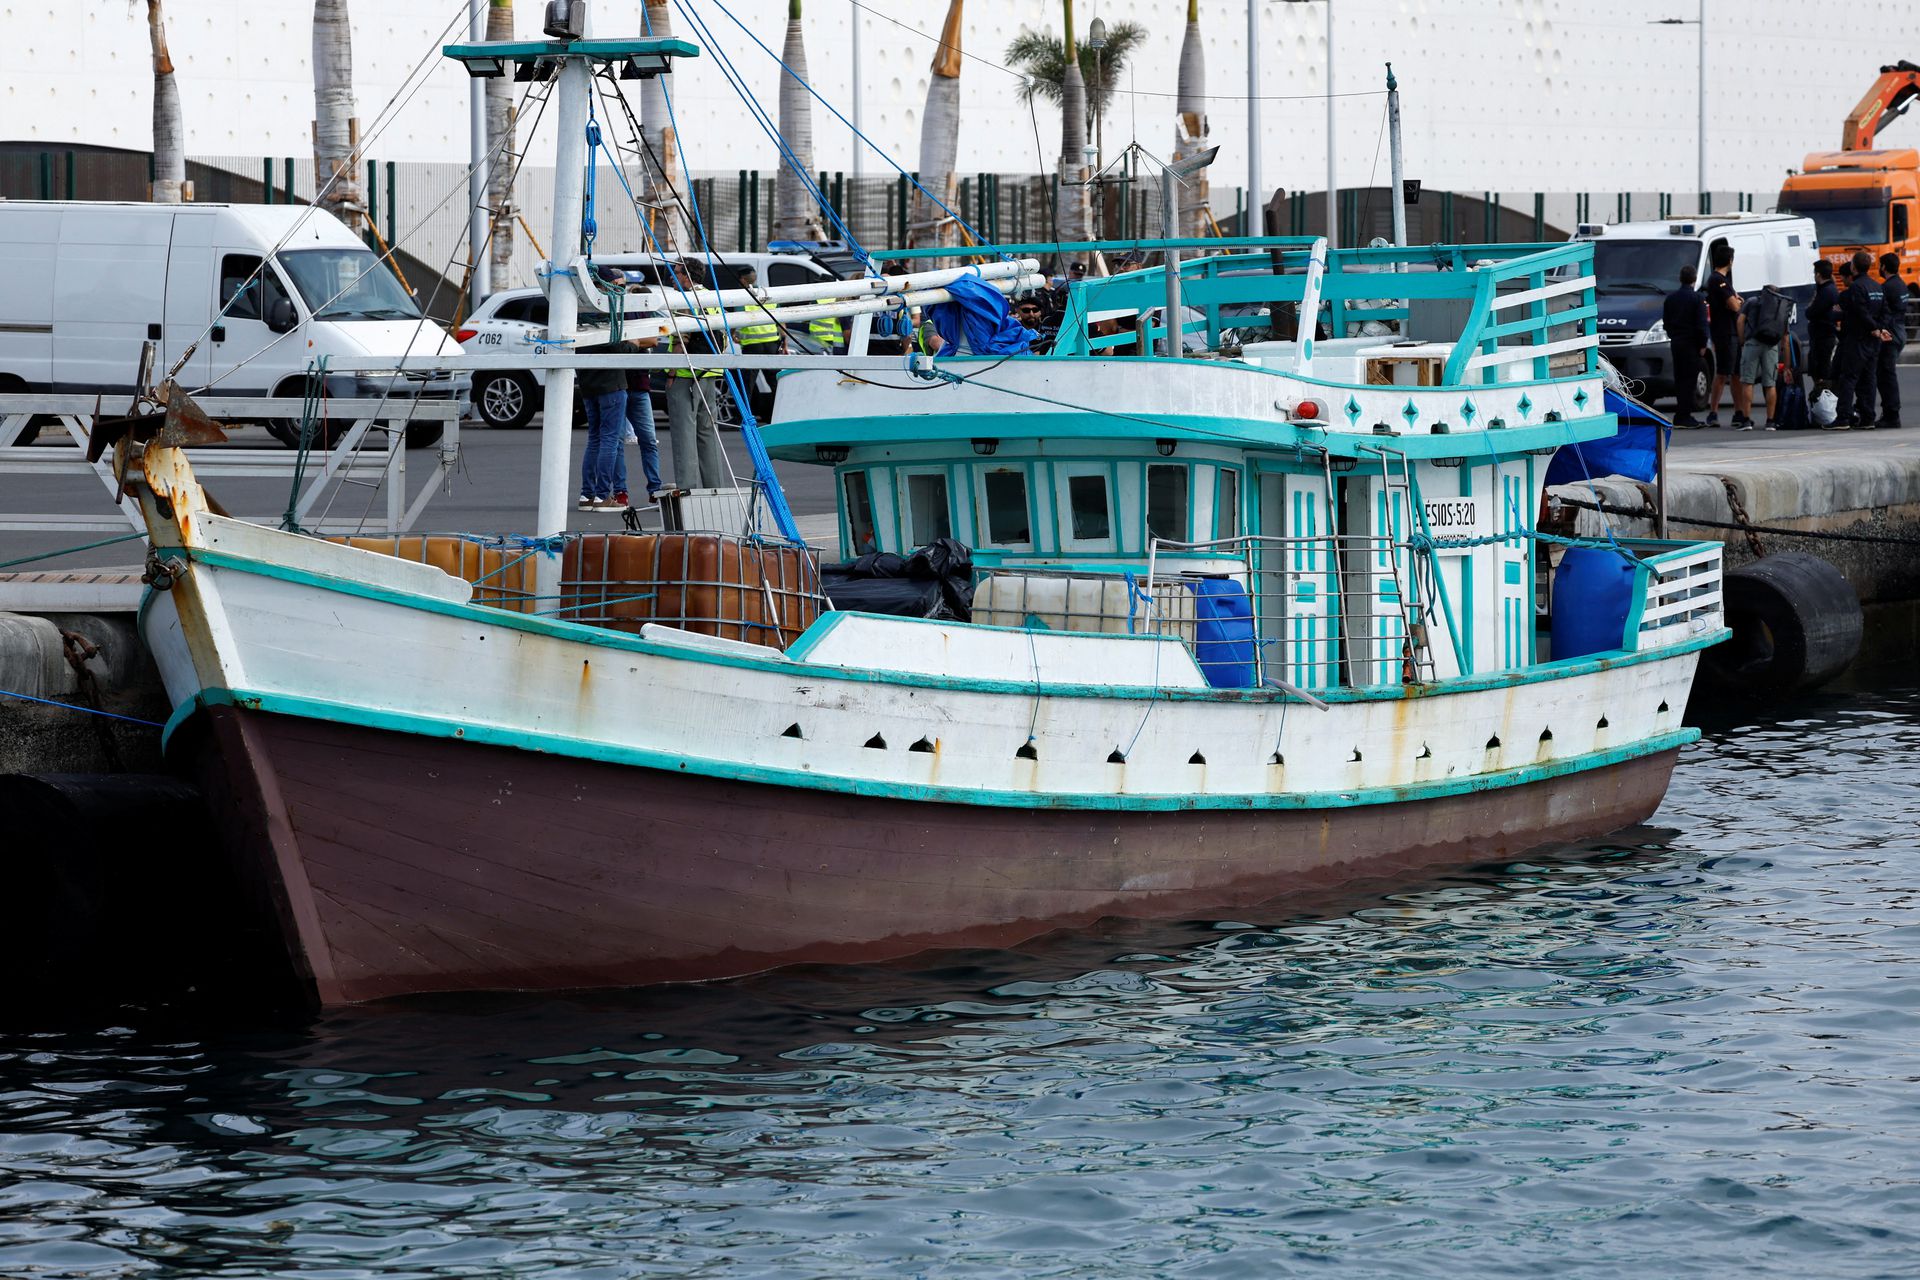 A Brazilian fishing boat docks in the port of Las Palmas de Gran Canaria, after its crew members were detained by the Spanish police officers for transporting approximately 1500 kilograms of cocaine on board, Gran Canaria, Spain, May 12, 2023. Photo: Reuters